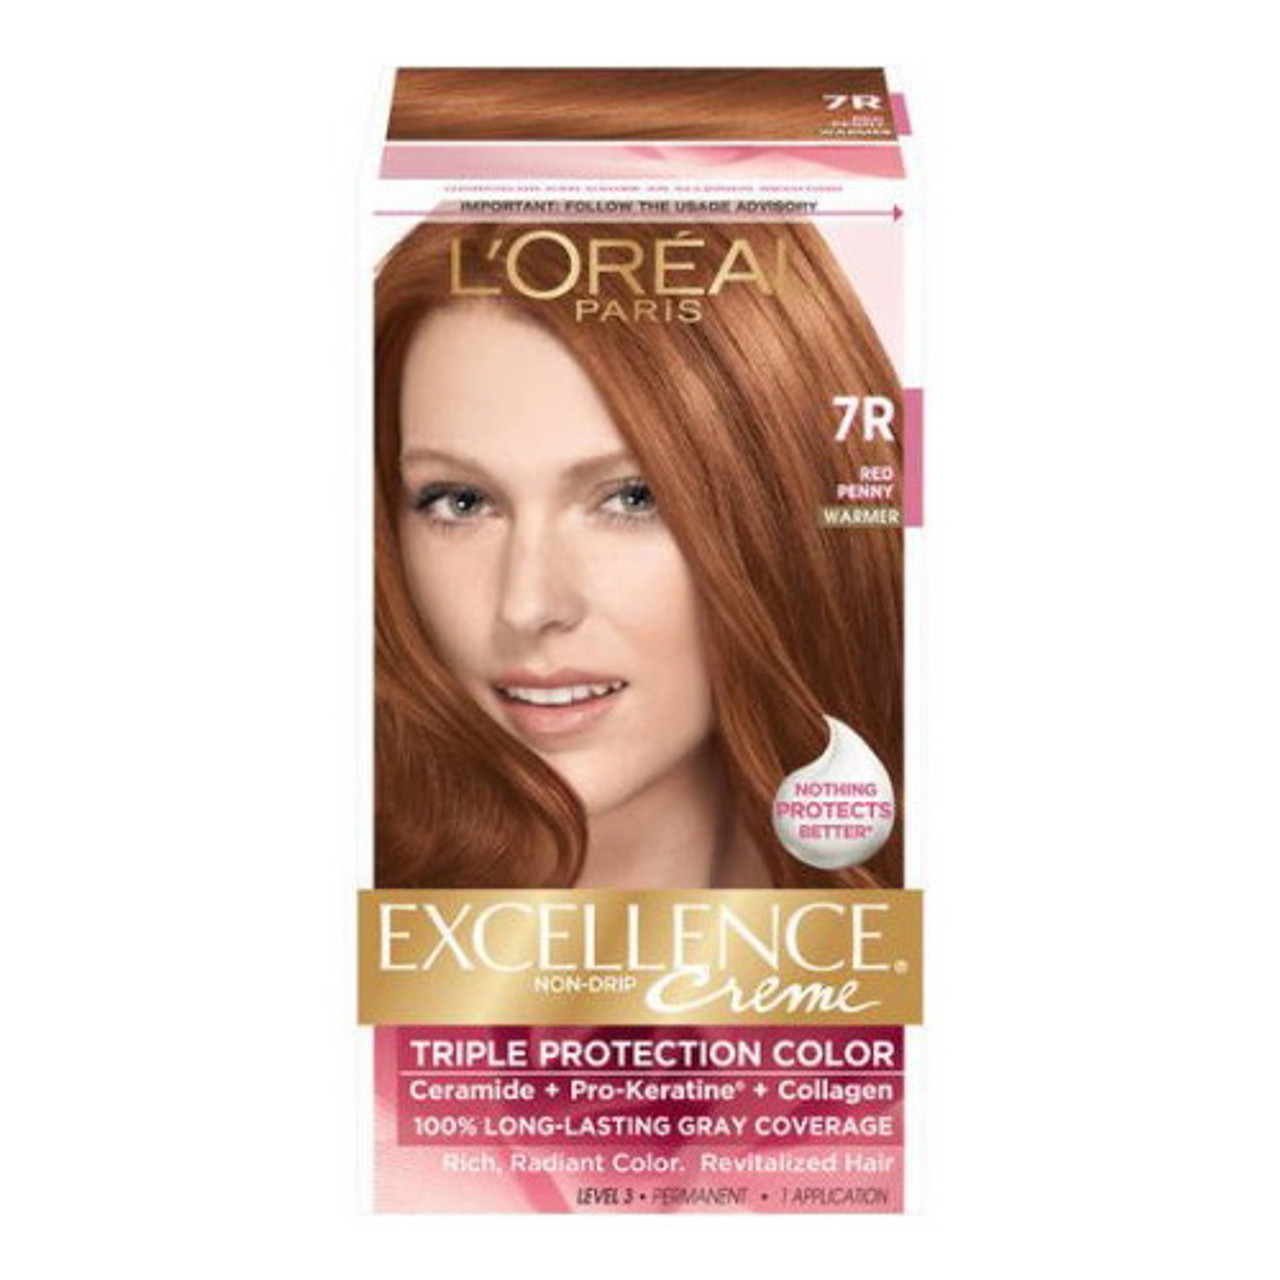 Geologi biografi Samle Loreal Excellence Triple Protection Hair Color Creme, #7R Red Penny - 1 Ea  - myotcstore.com